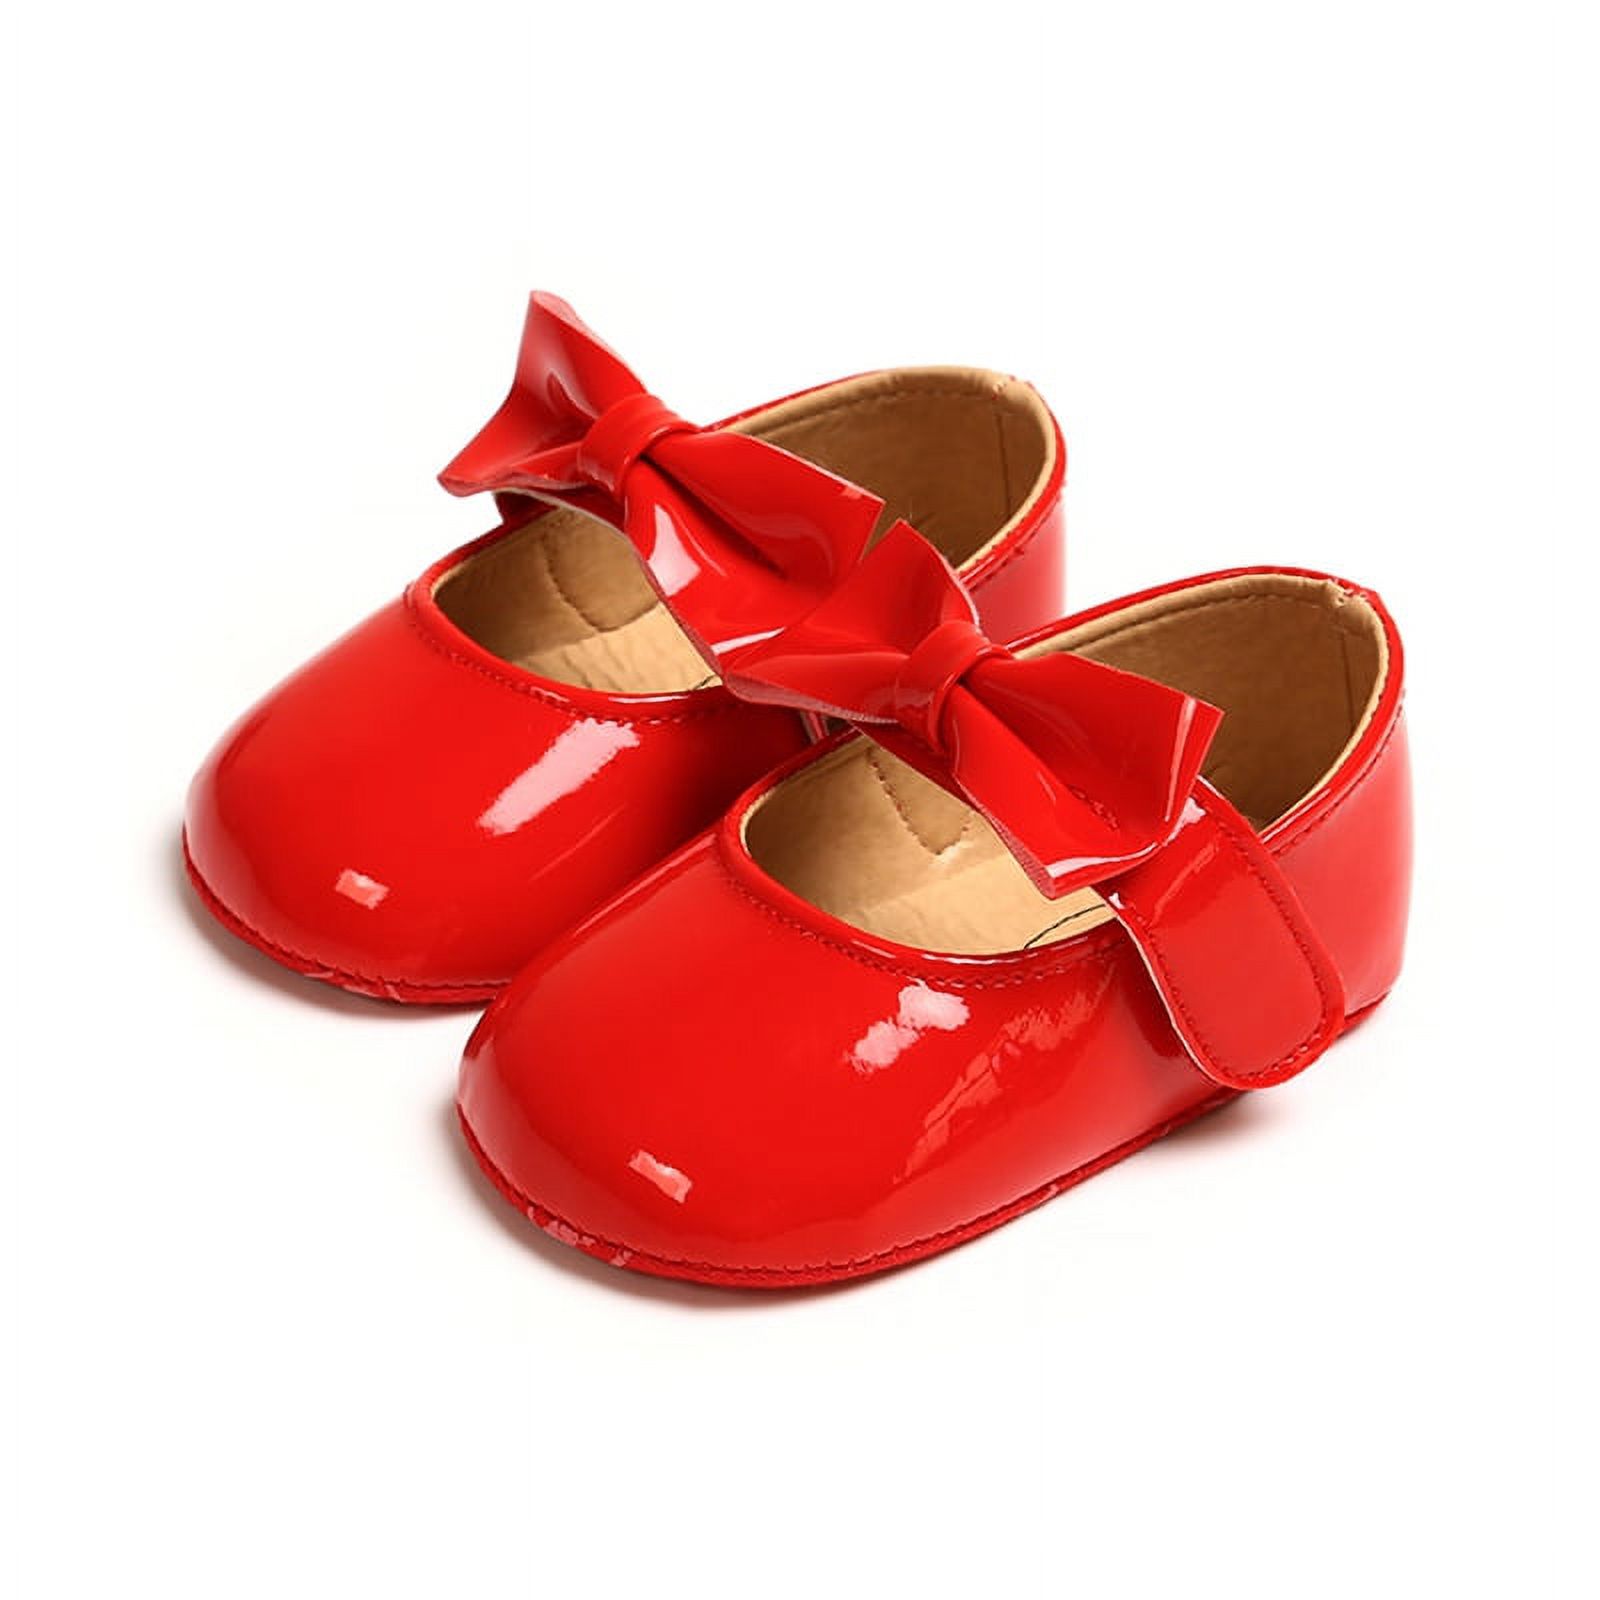 Poseca Infant Baby Girls Shoes Flats Bownot Soft Leather No-Slip Toddler First Walker Princess Dress Shoes Baby Girls Shoes - image 2 of 5